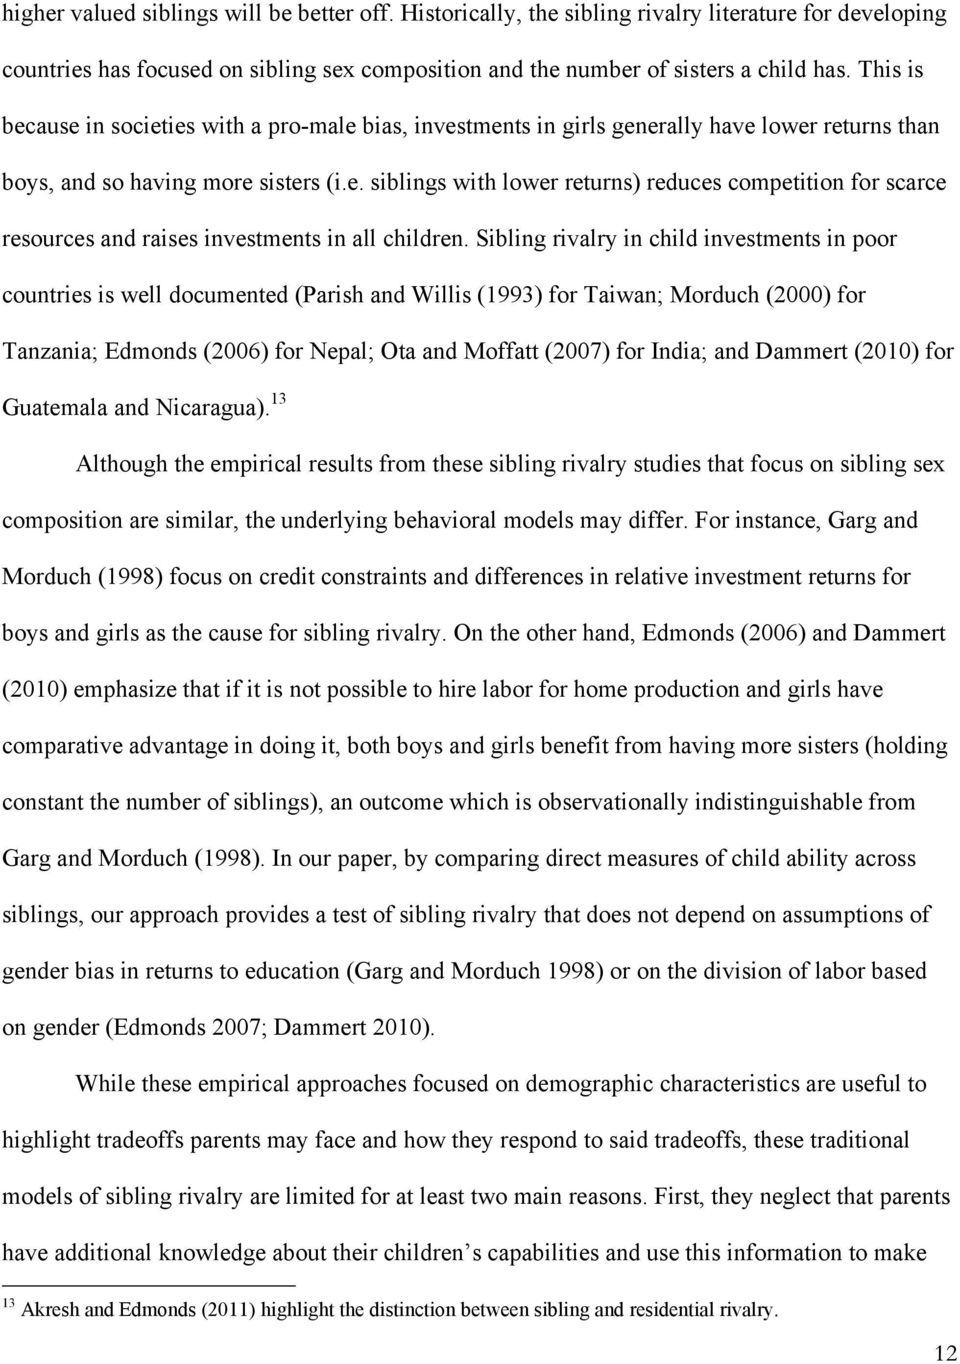 Sibling rivalry in child investments in poor countries is well documented (Parish and Willis (1993) for Taiwan; Morduch (2000) for Tanzania; Edmonds (2006) for Nepal; Ota and Moffatt (2007) for